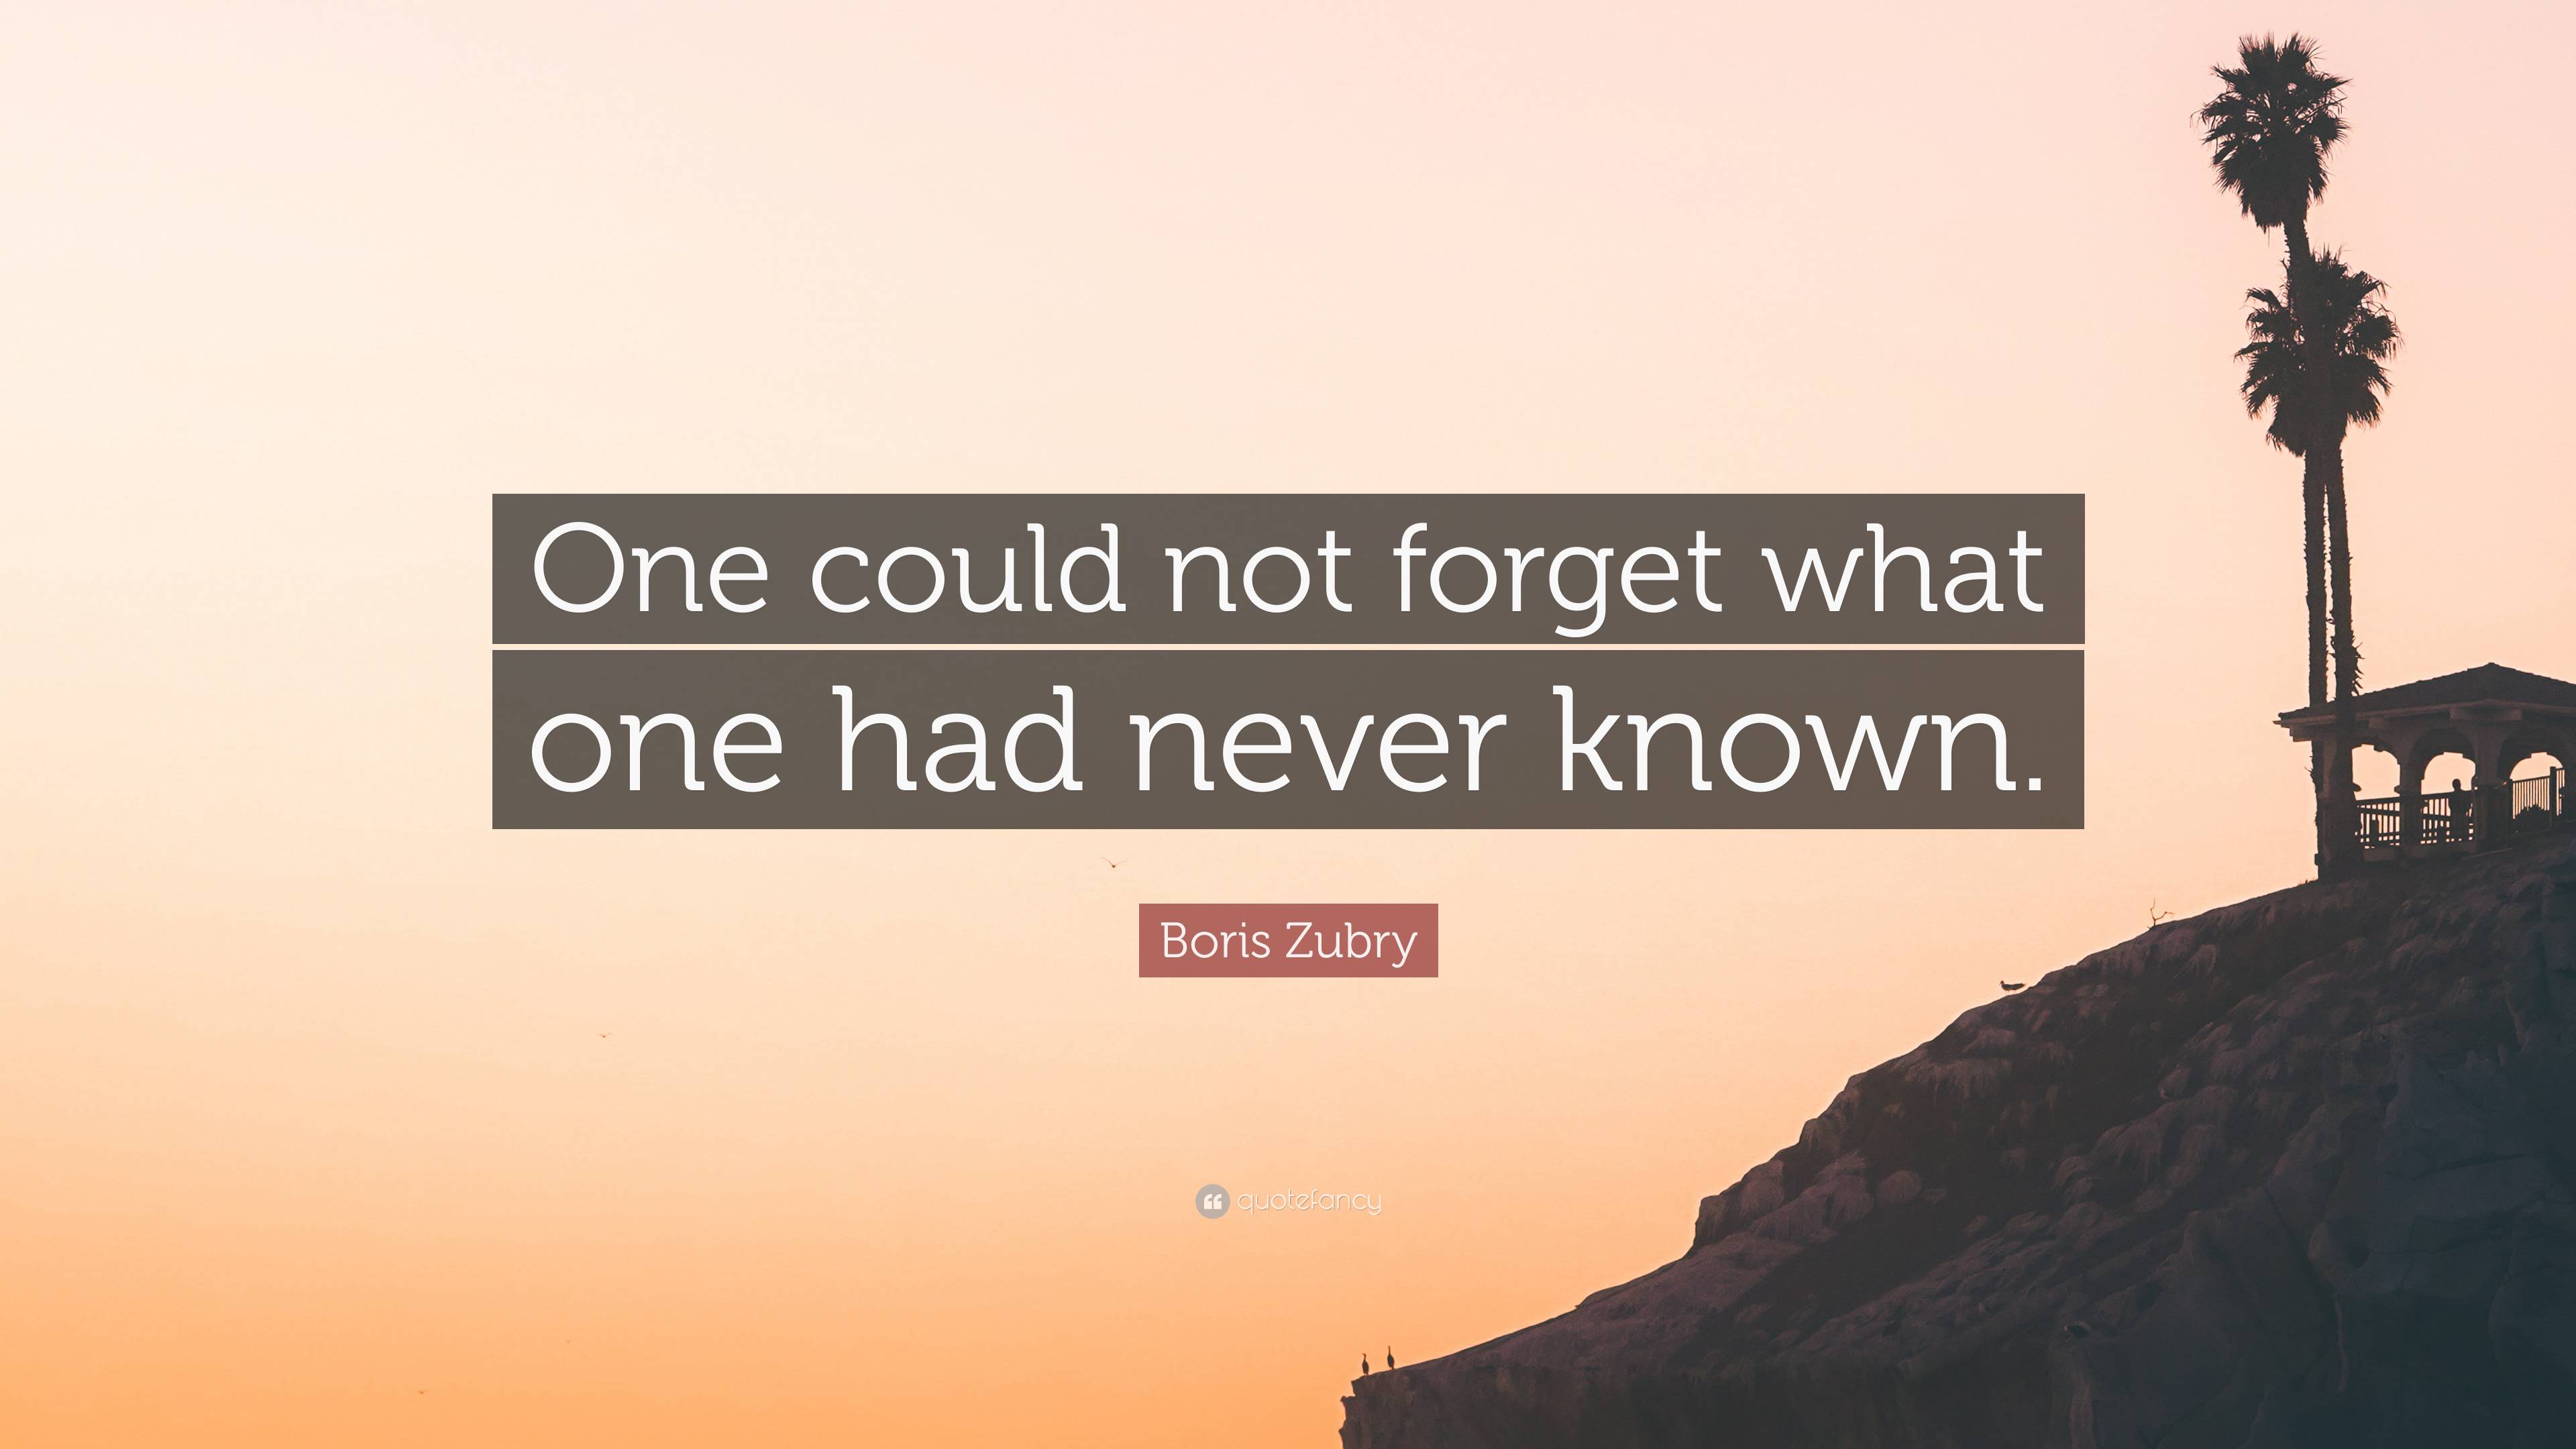 Boris Zubry Quote: “One could not forget what one had never known.”